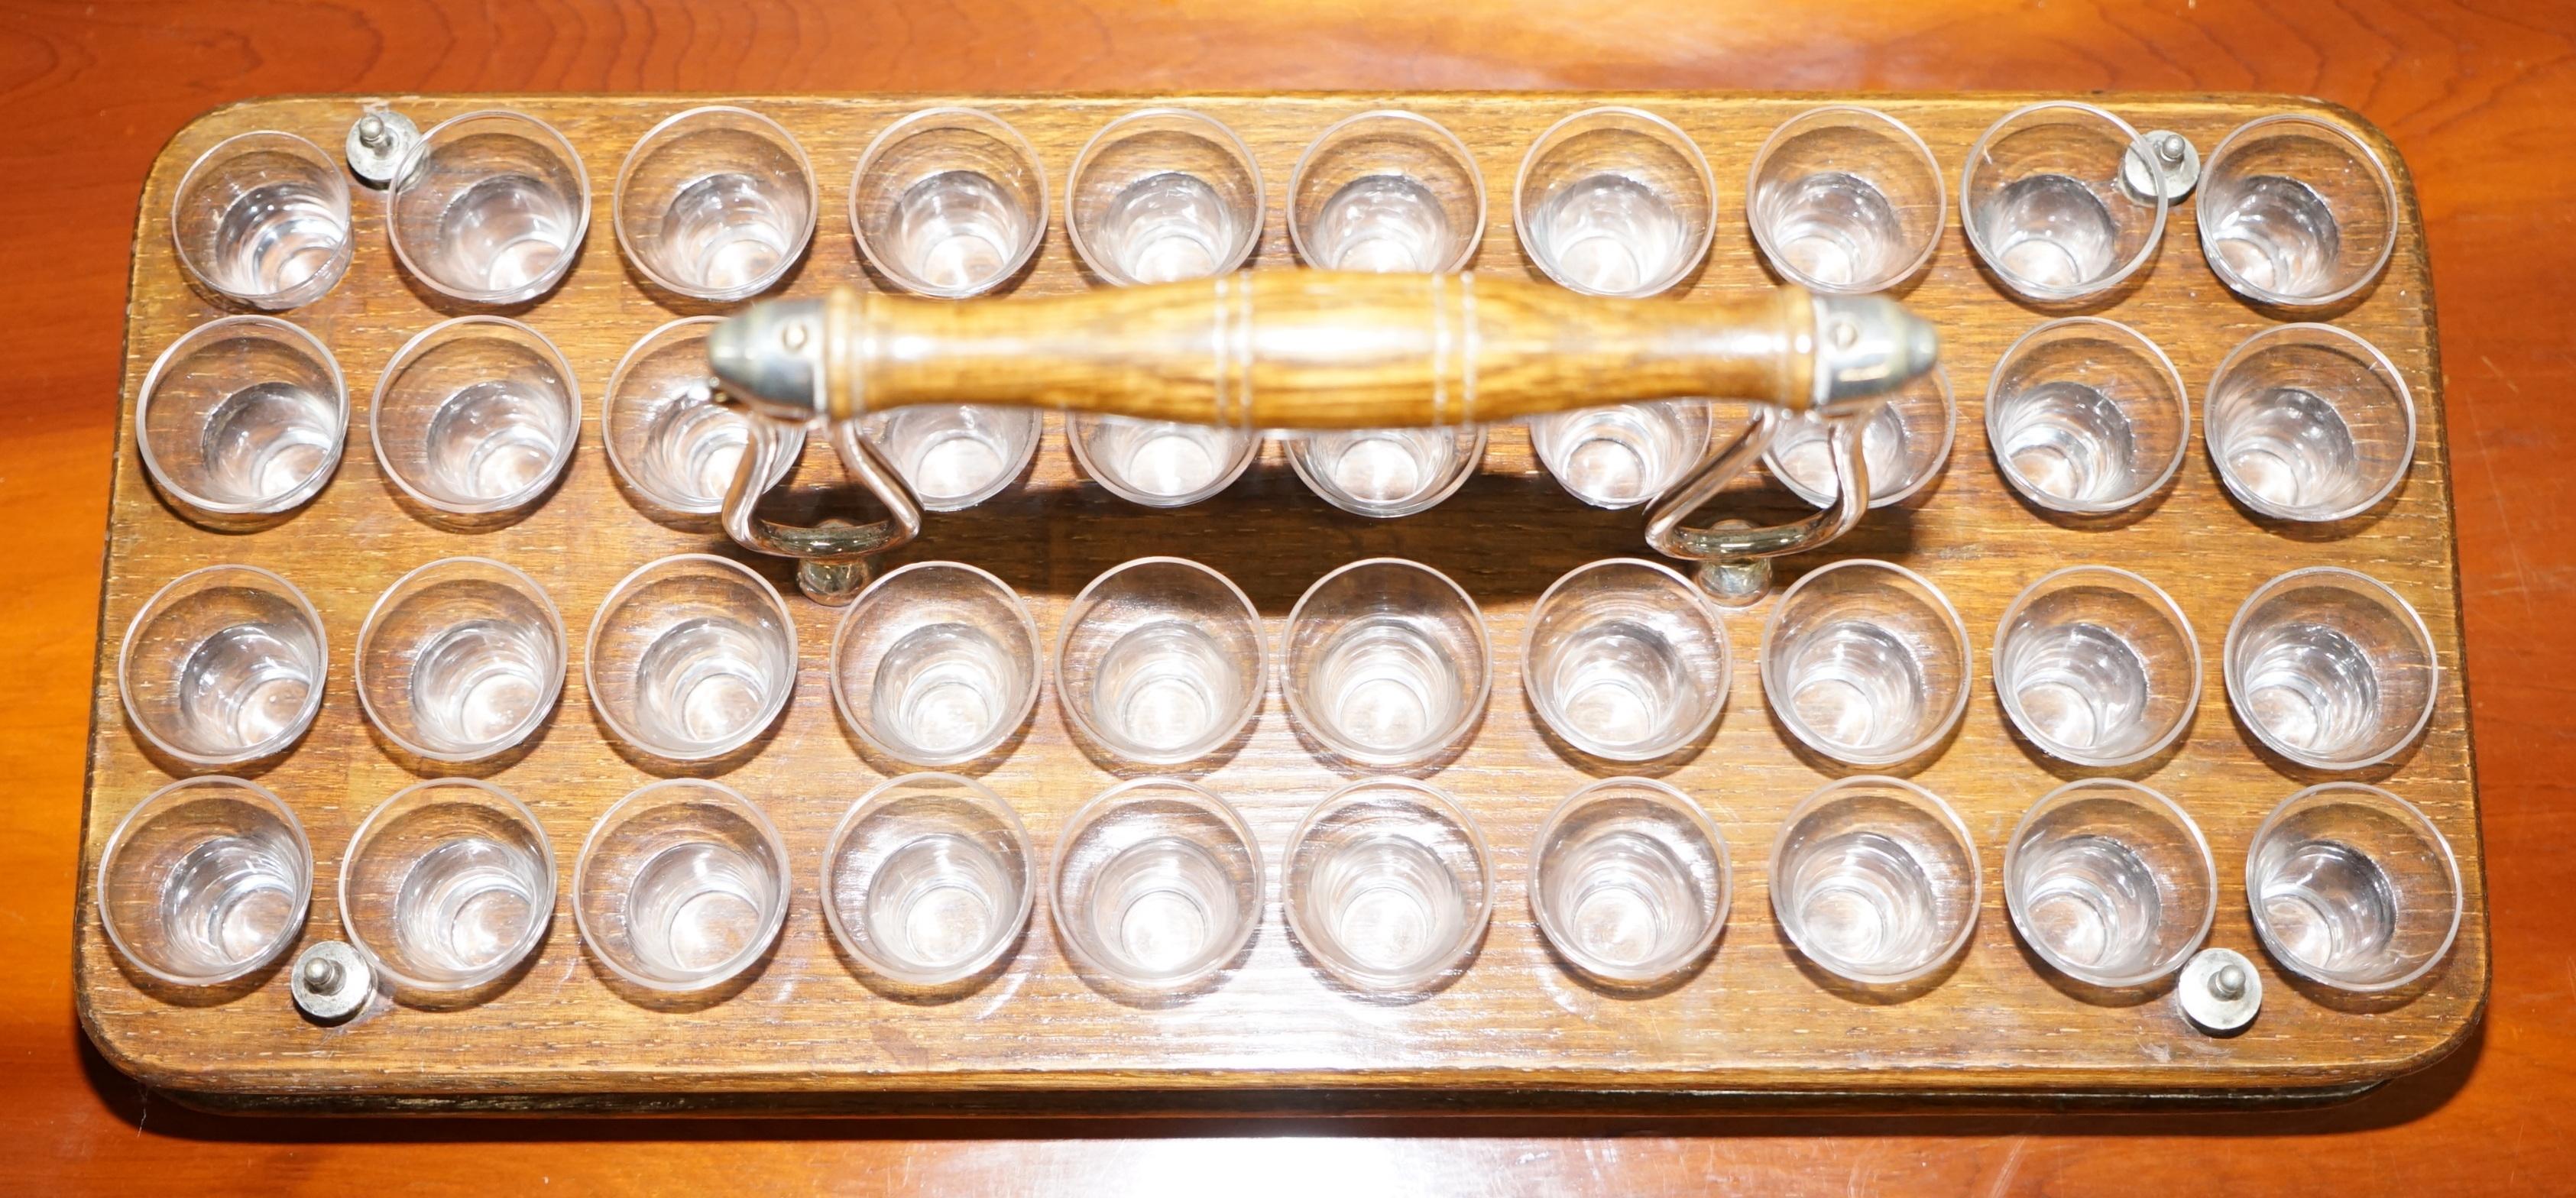 Early 20th Century Antique Black Forest Wood 40 Shot Glass Serving Tray, Silver Mounted Handles